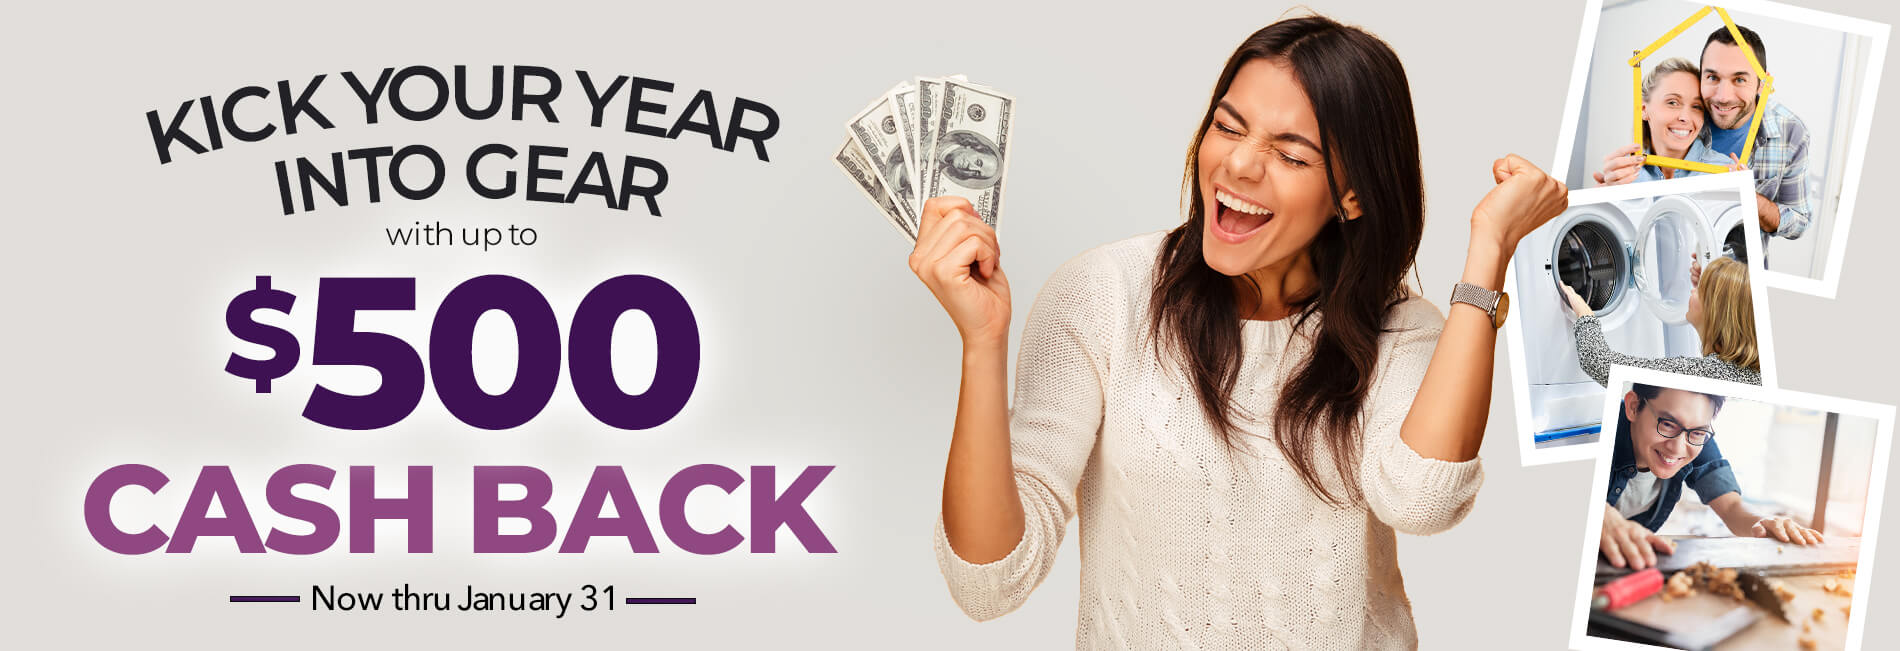 kick your year into gear with low loan rates.